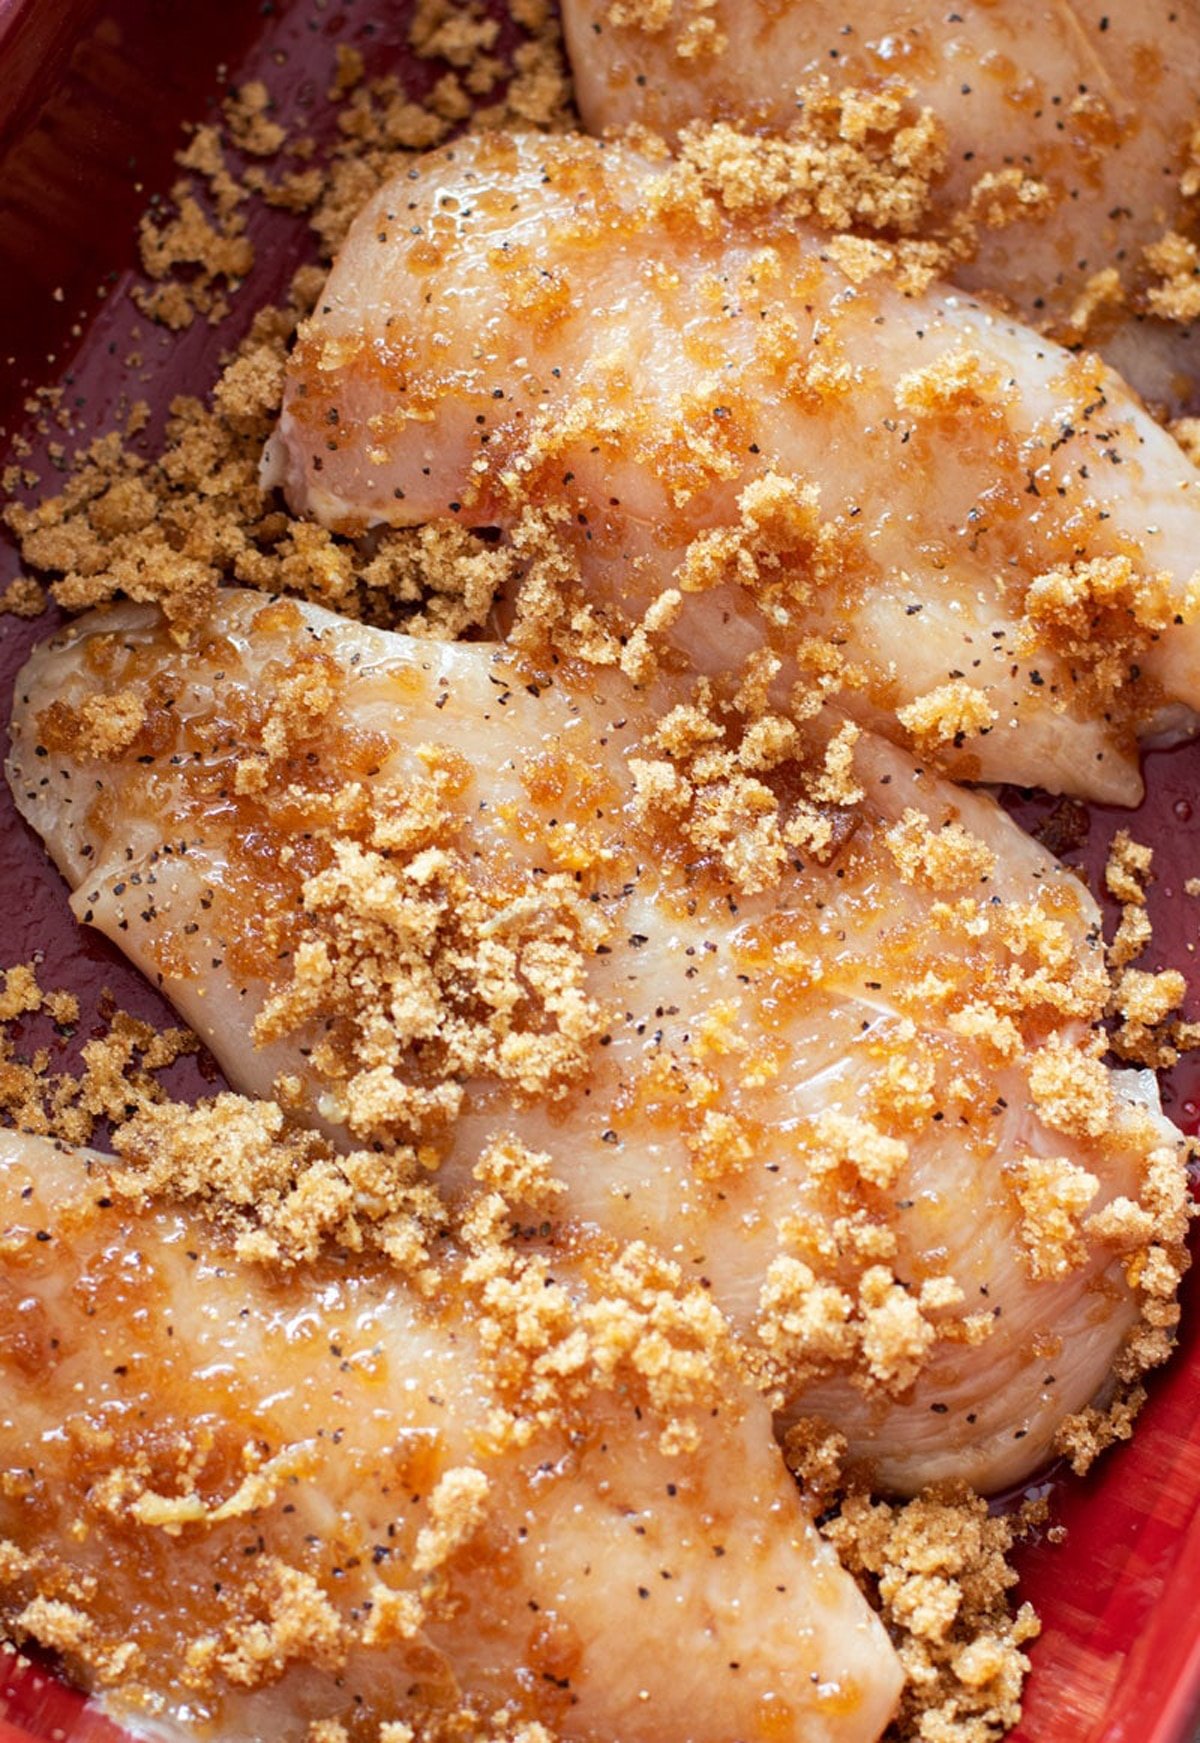 Chicken breasts covered in a garlic and brown sugar rub in a baking dish.